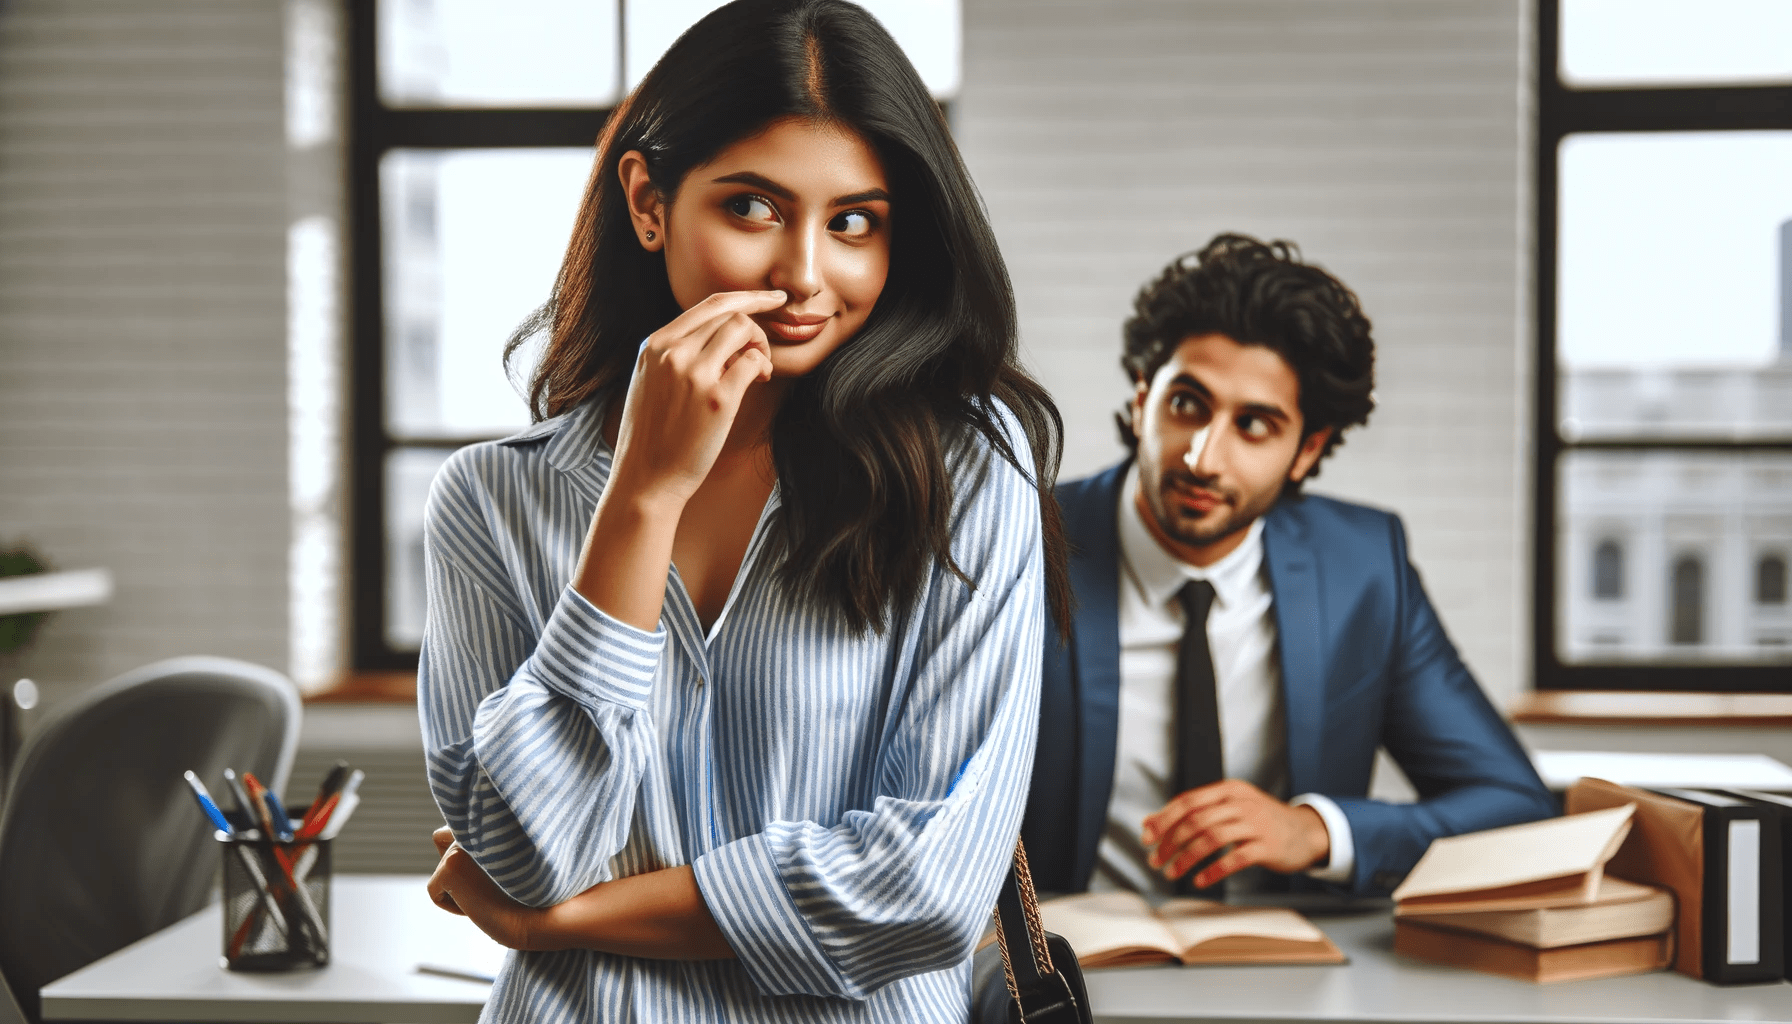 Woman subtly hinting to her male colleague that he smells